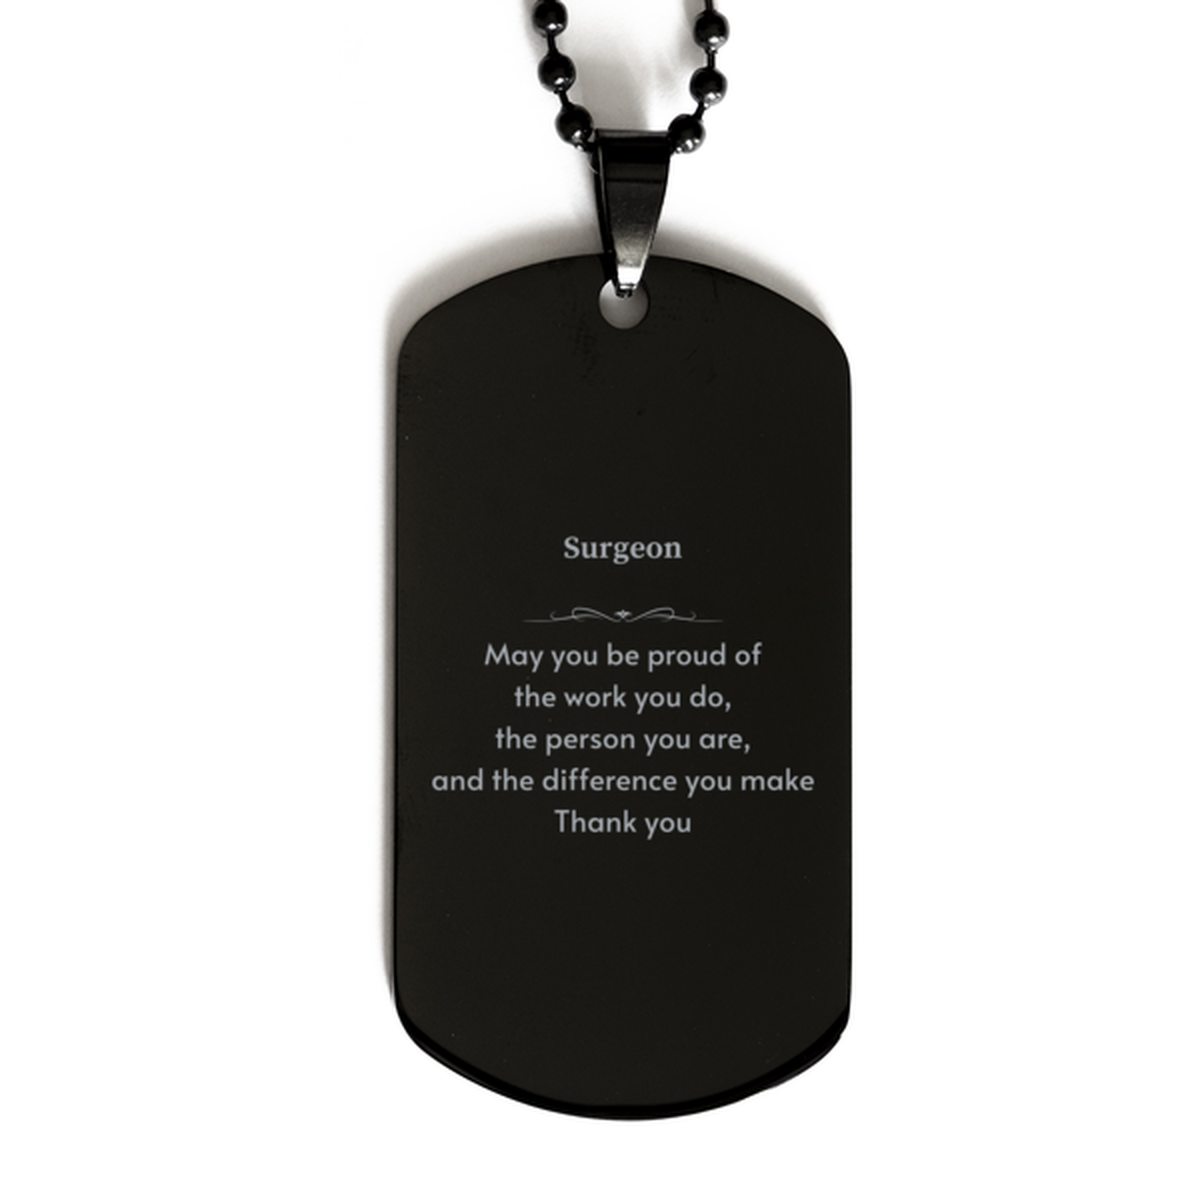 Heartwarming Black Dog Tag Retirement Coworkers Gifts for Surgeon, Surgeon May You be proud of the work you do, the person you are Gifts for Boss Men Women Friends